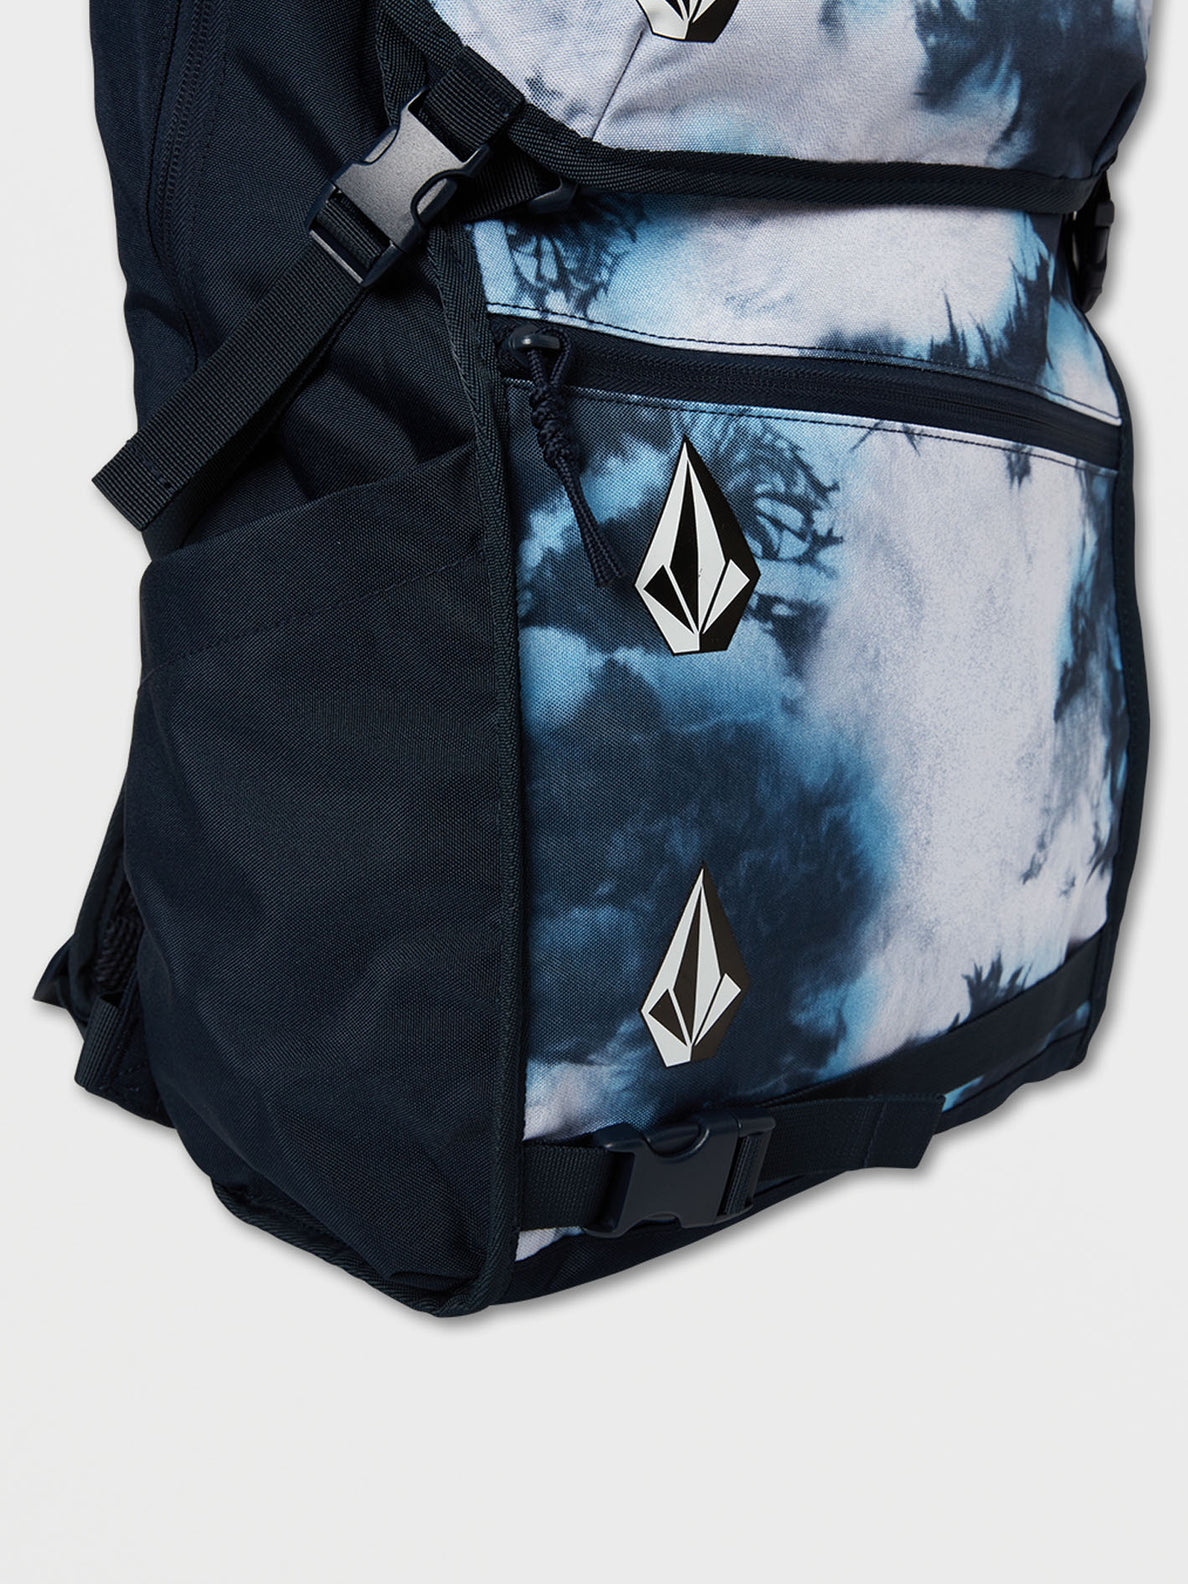 Volcom Substrate Backpack - STORM BLUE (D6532107_SRB) [3]